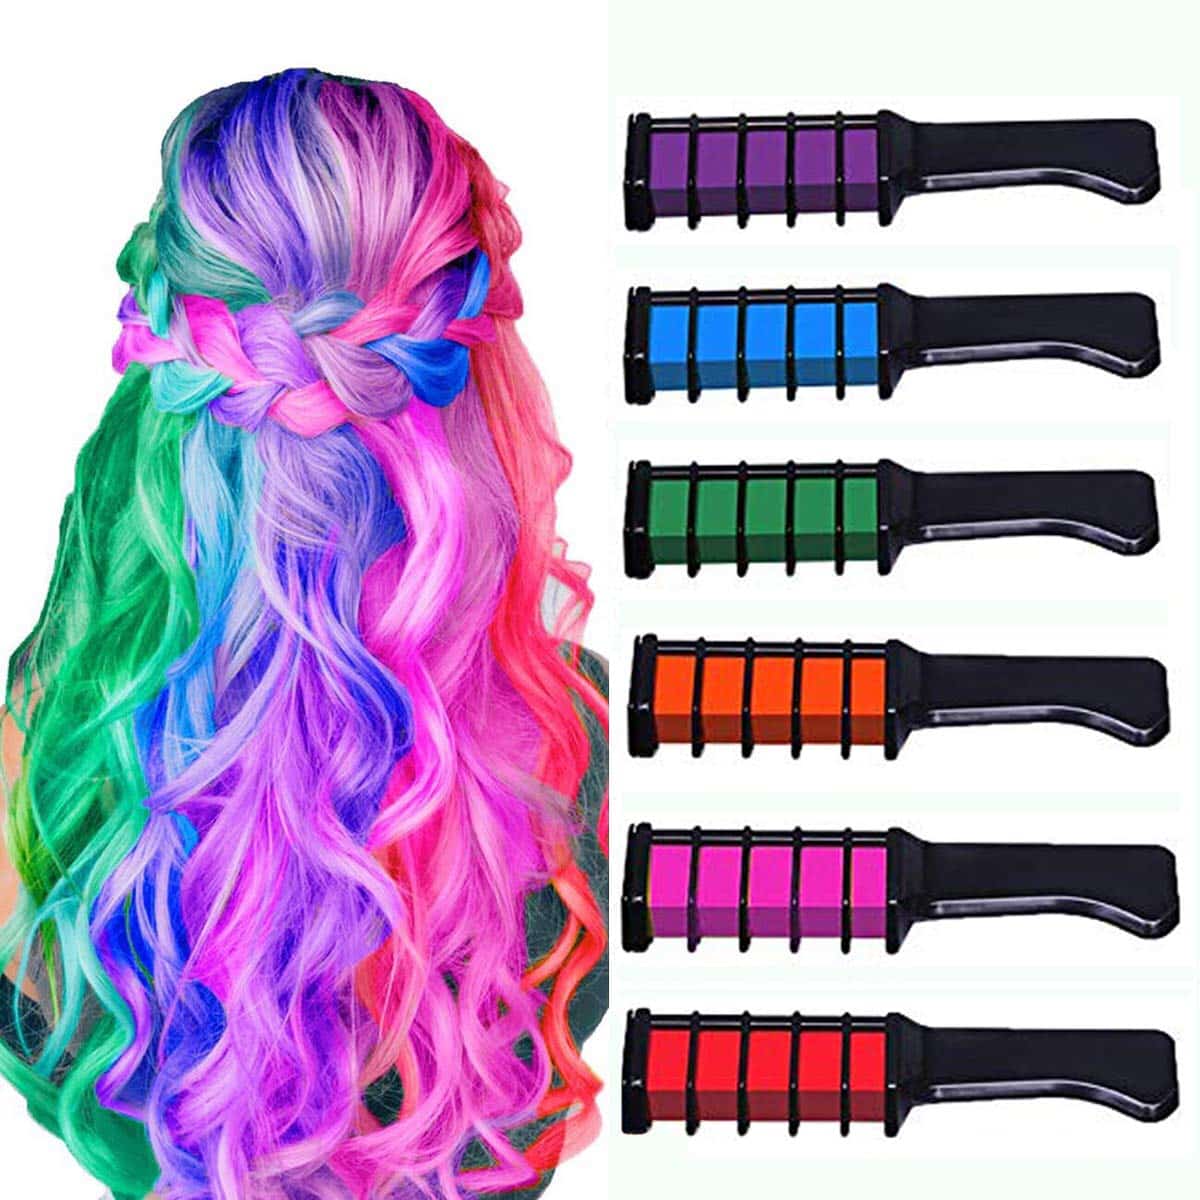 Hair Chalk Comb - Make up gift for girls